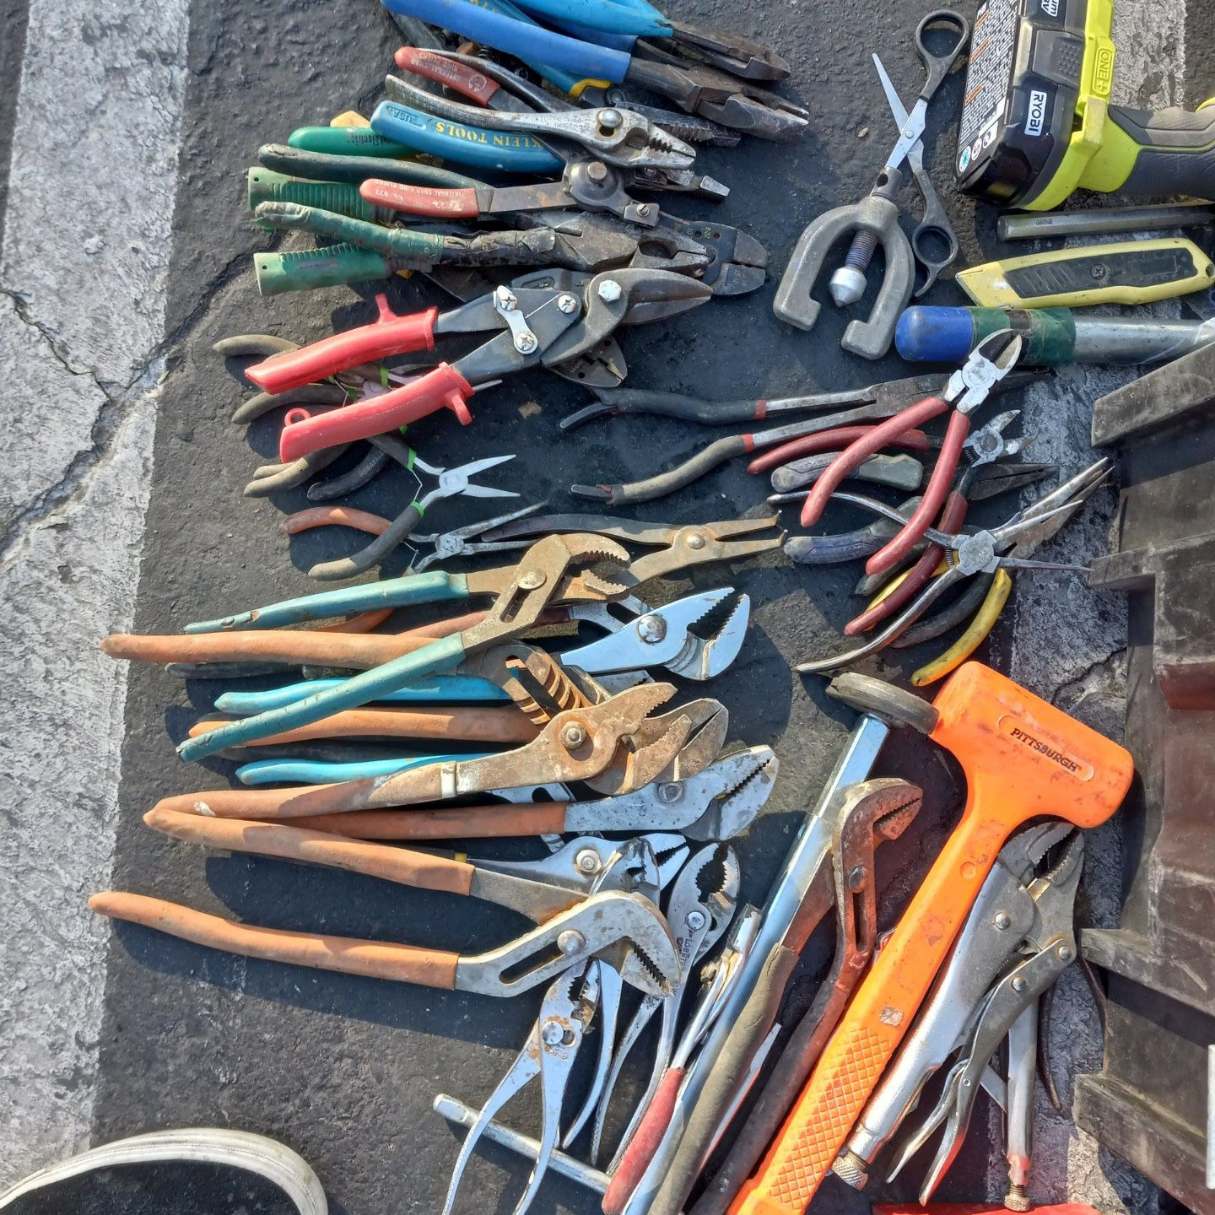 Where Can You Buy Used Hand Tools In San Diego